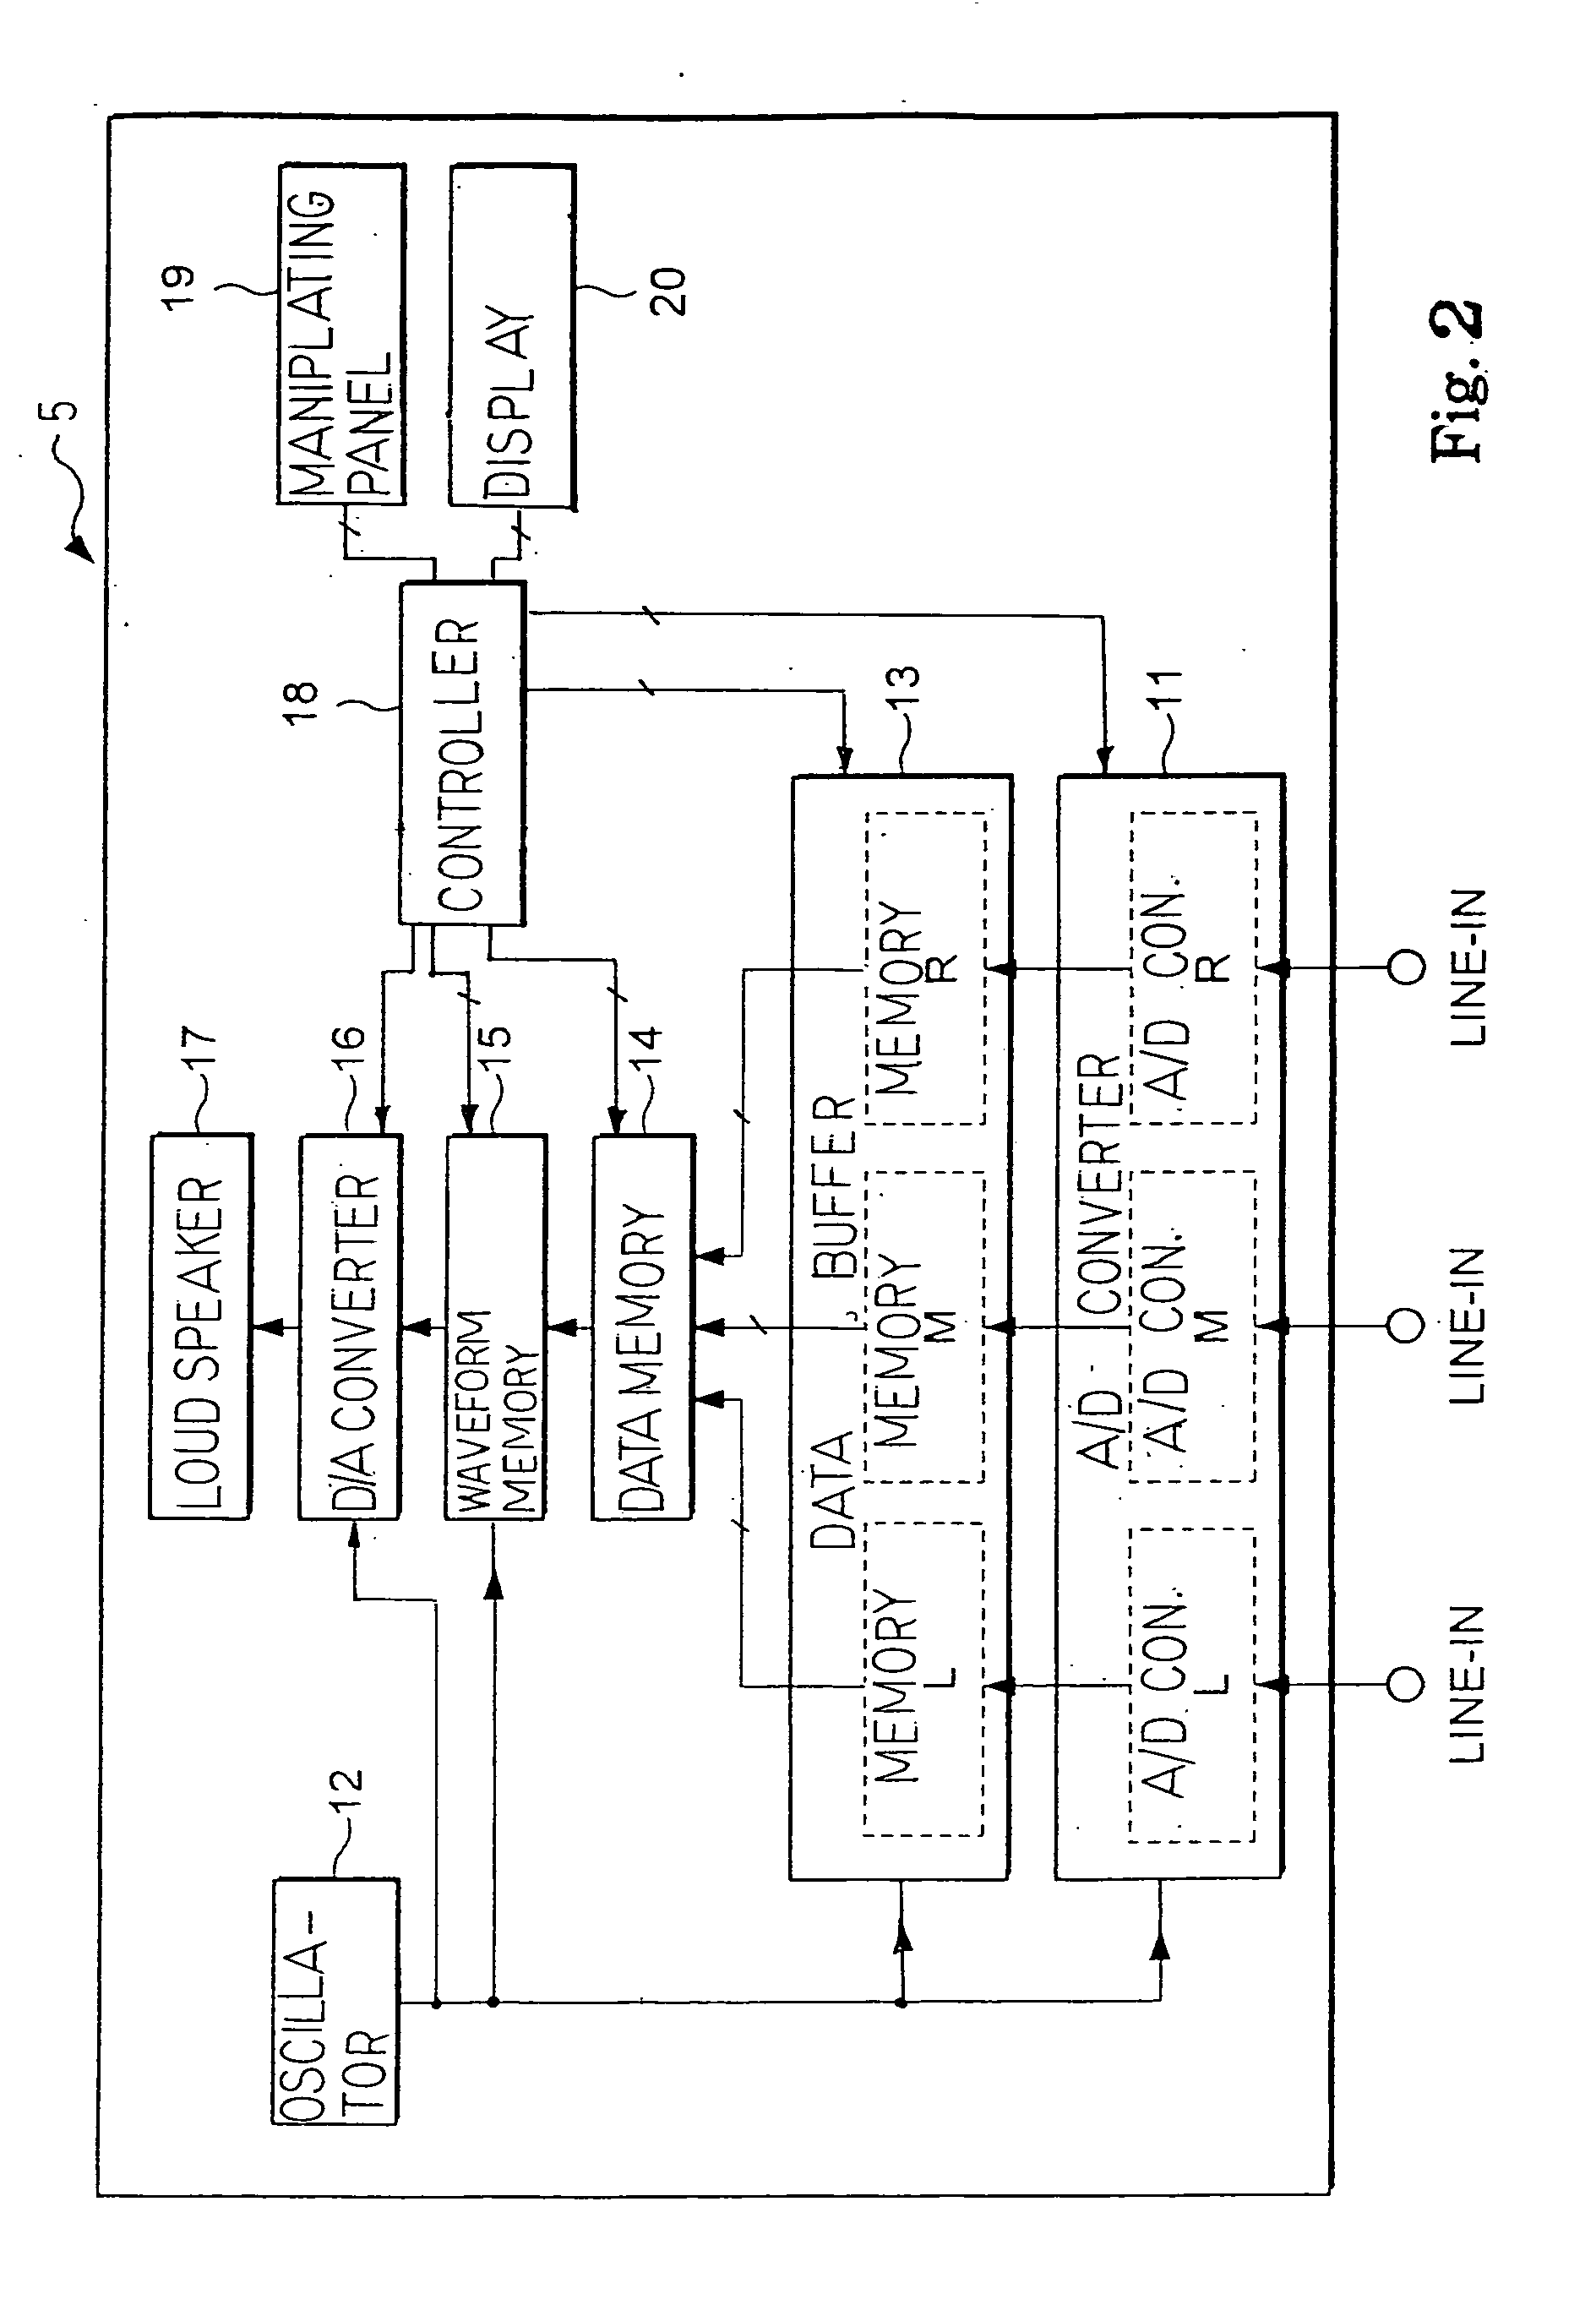 Method for making electronic tones close to acoustic tones, recording system